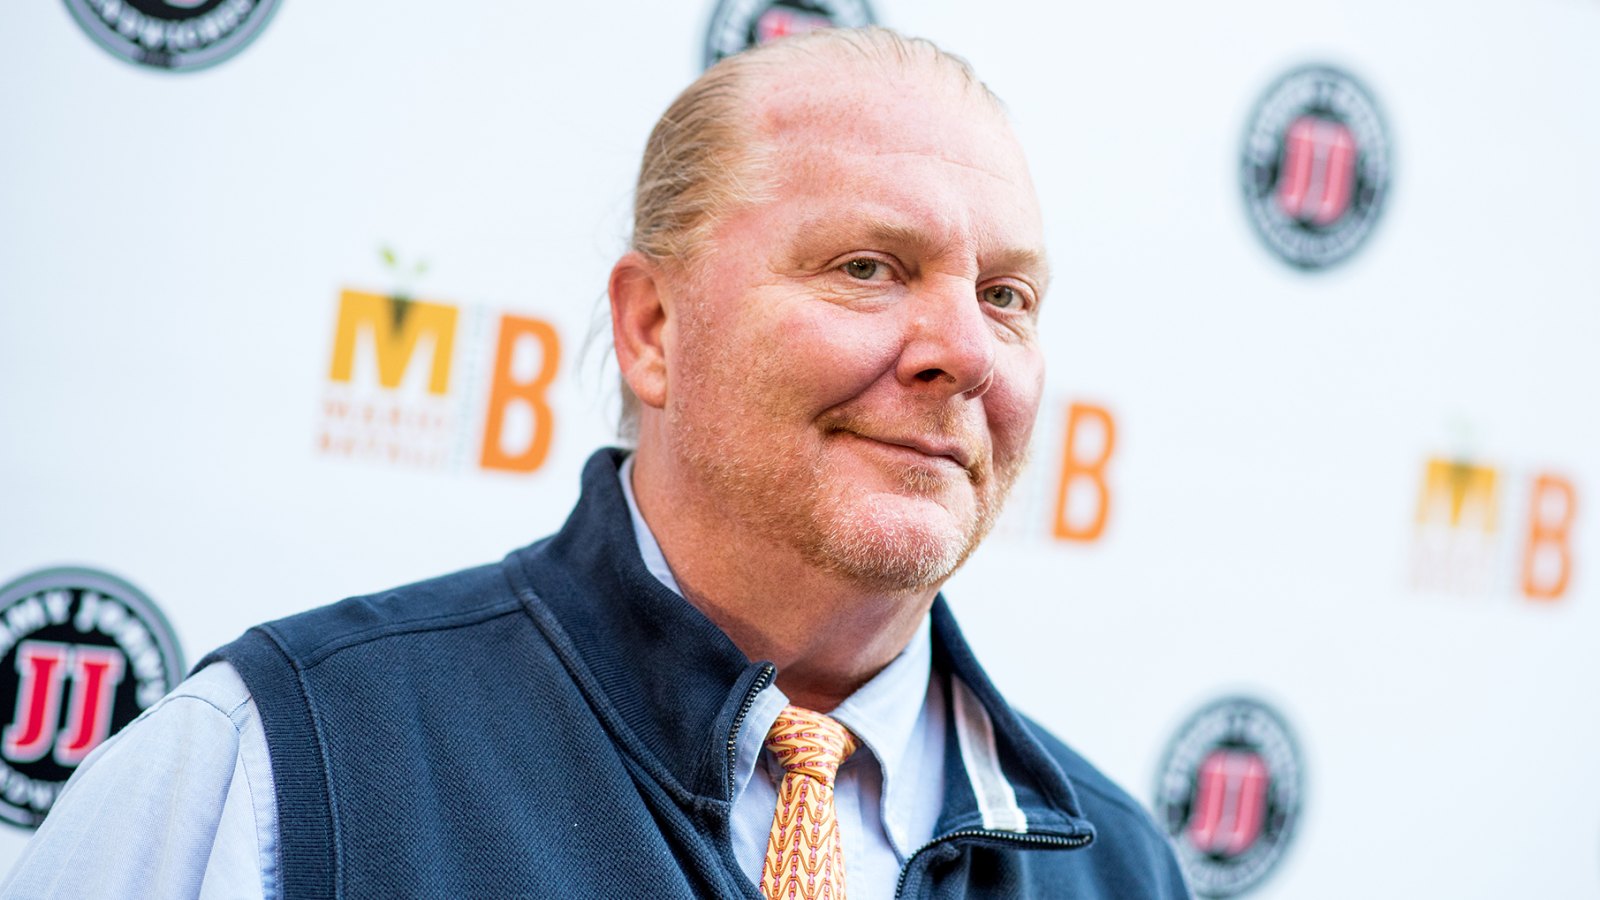 Mario Batali Breaks Silence One Year After Sexual Misconduct Allegations: ‘It’s Been a Bad Year’